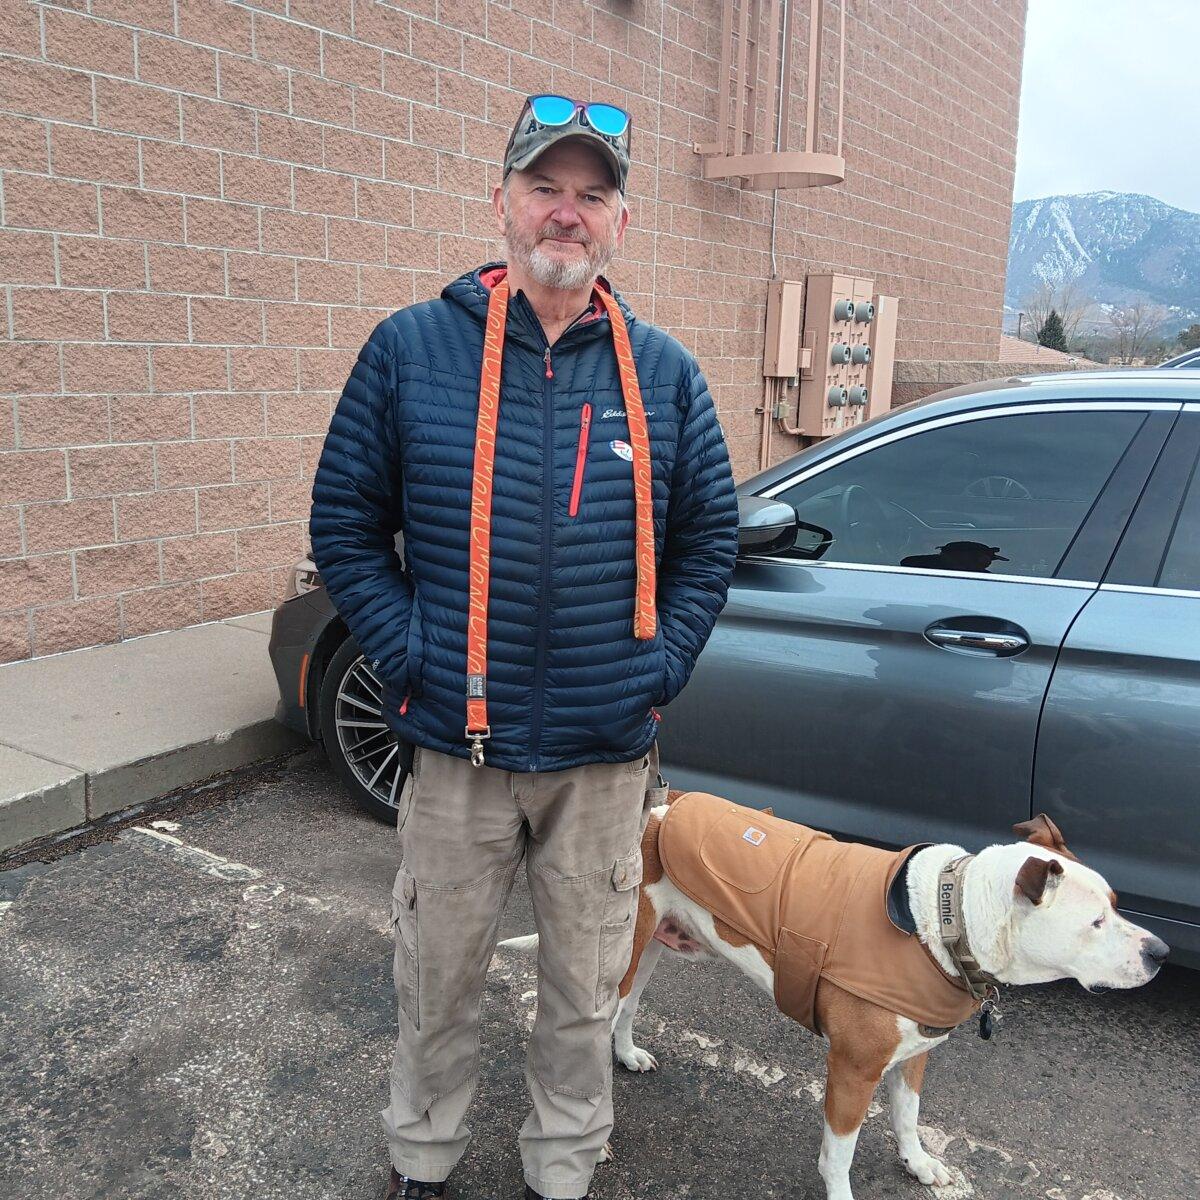 Michael Staunton with his dog, Benny, outside a polling place in Monument, Colorado, after voting on Super Tuesday, March 5, 2024. (Nathan Worcester/The Epoch Times)